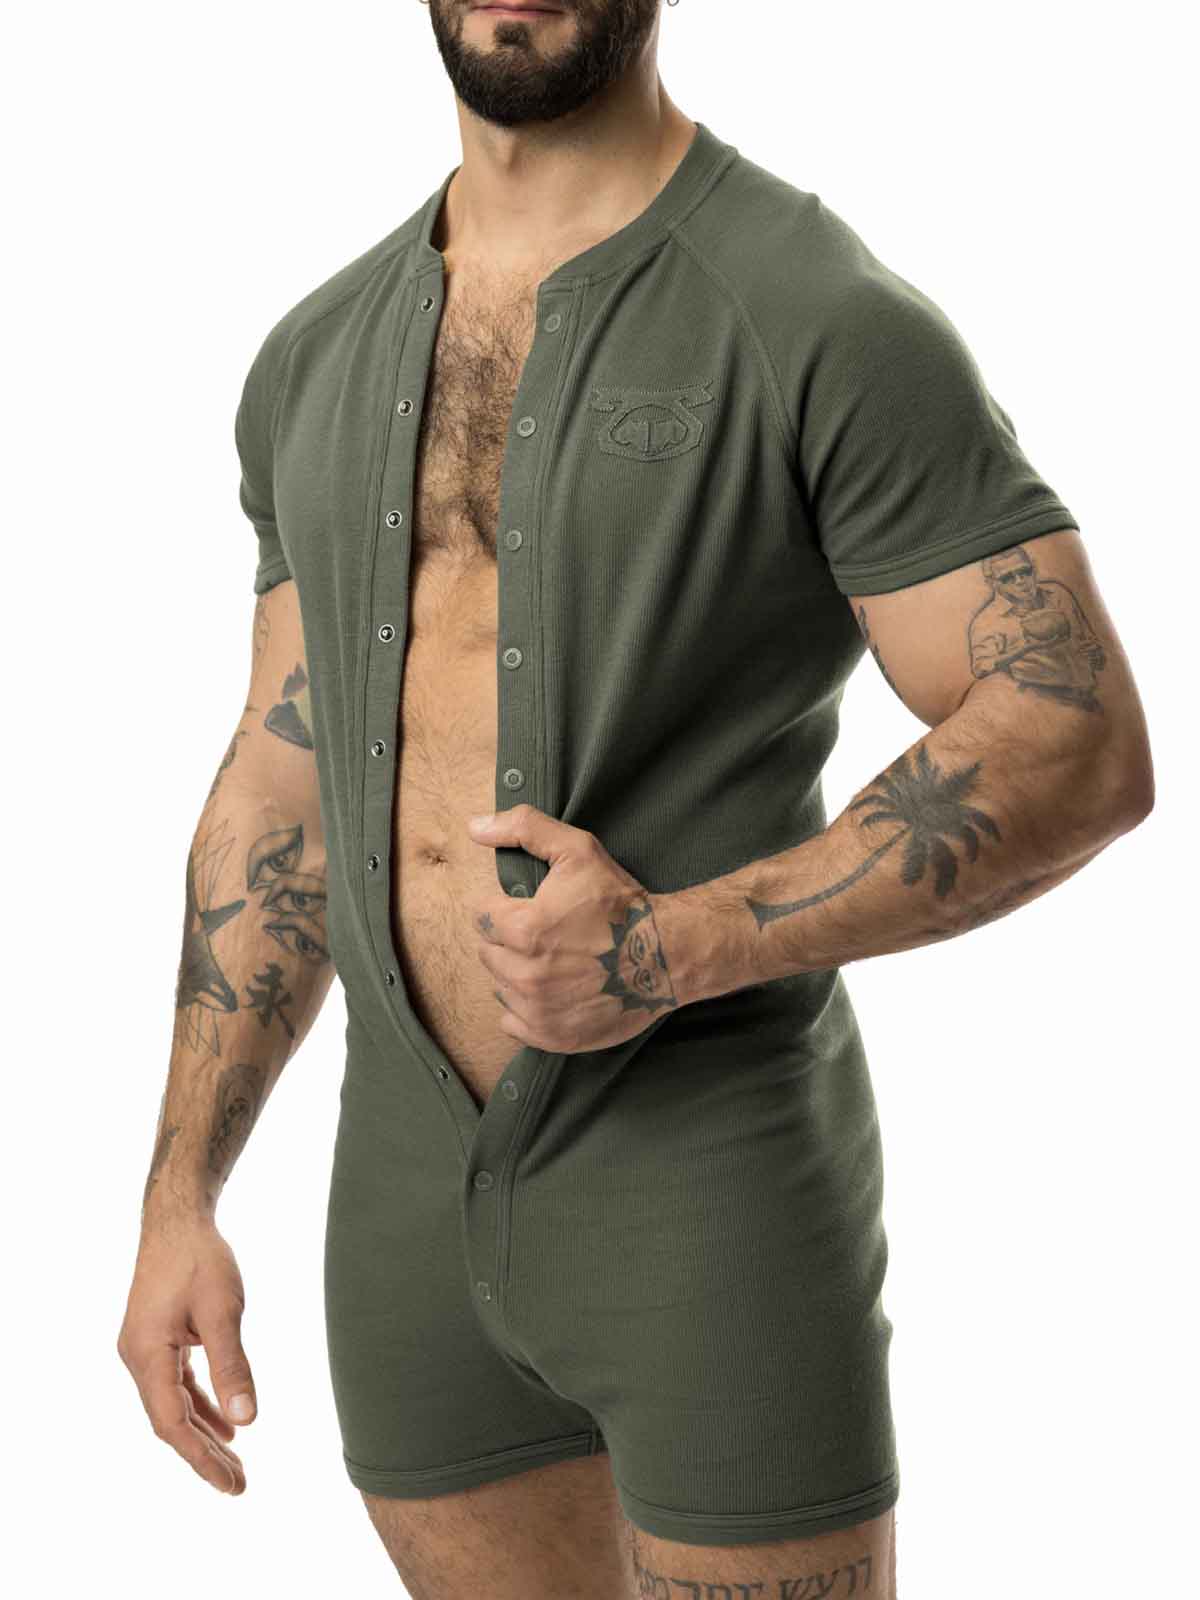 NASTY PIG UNION  SUIT CUT OFF ARMY GREEN - FullKit.com